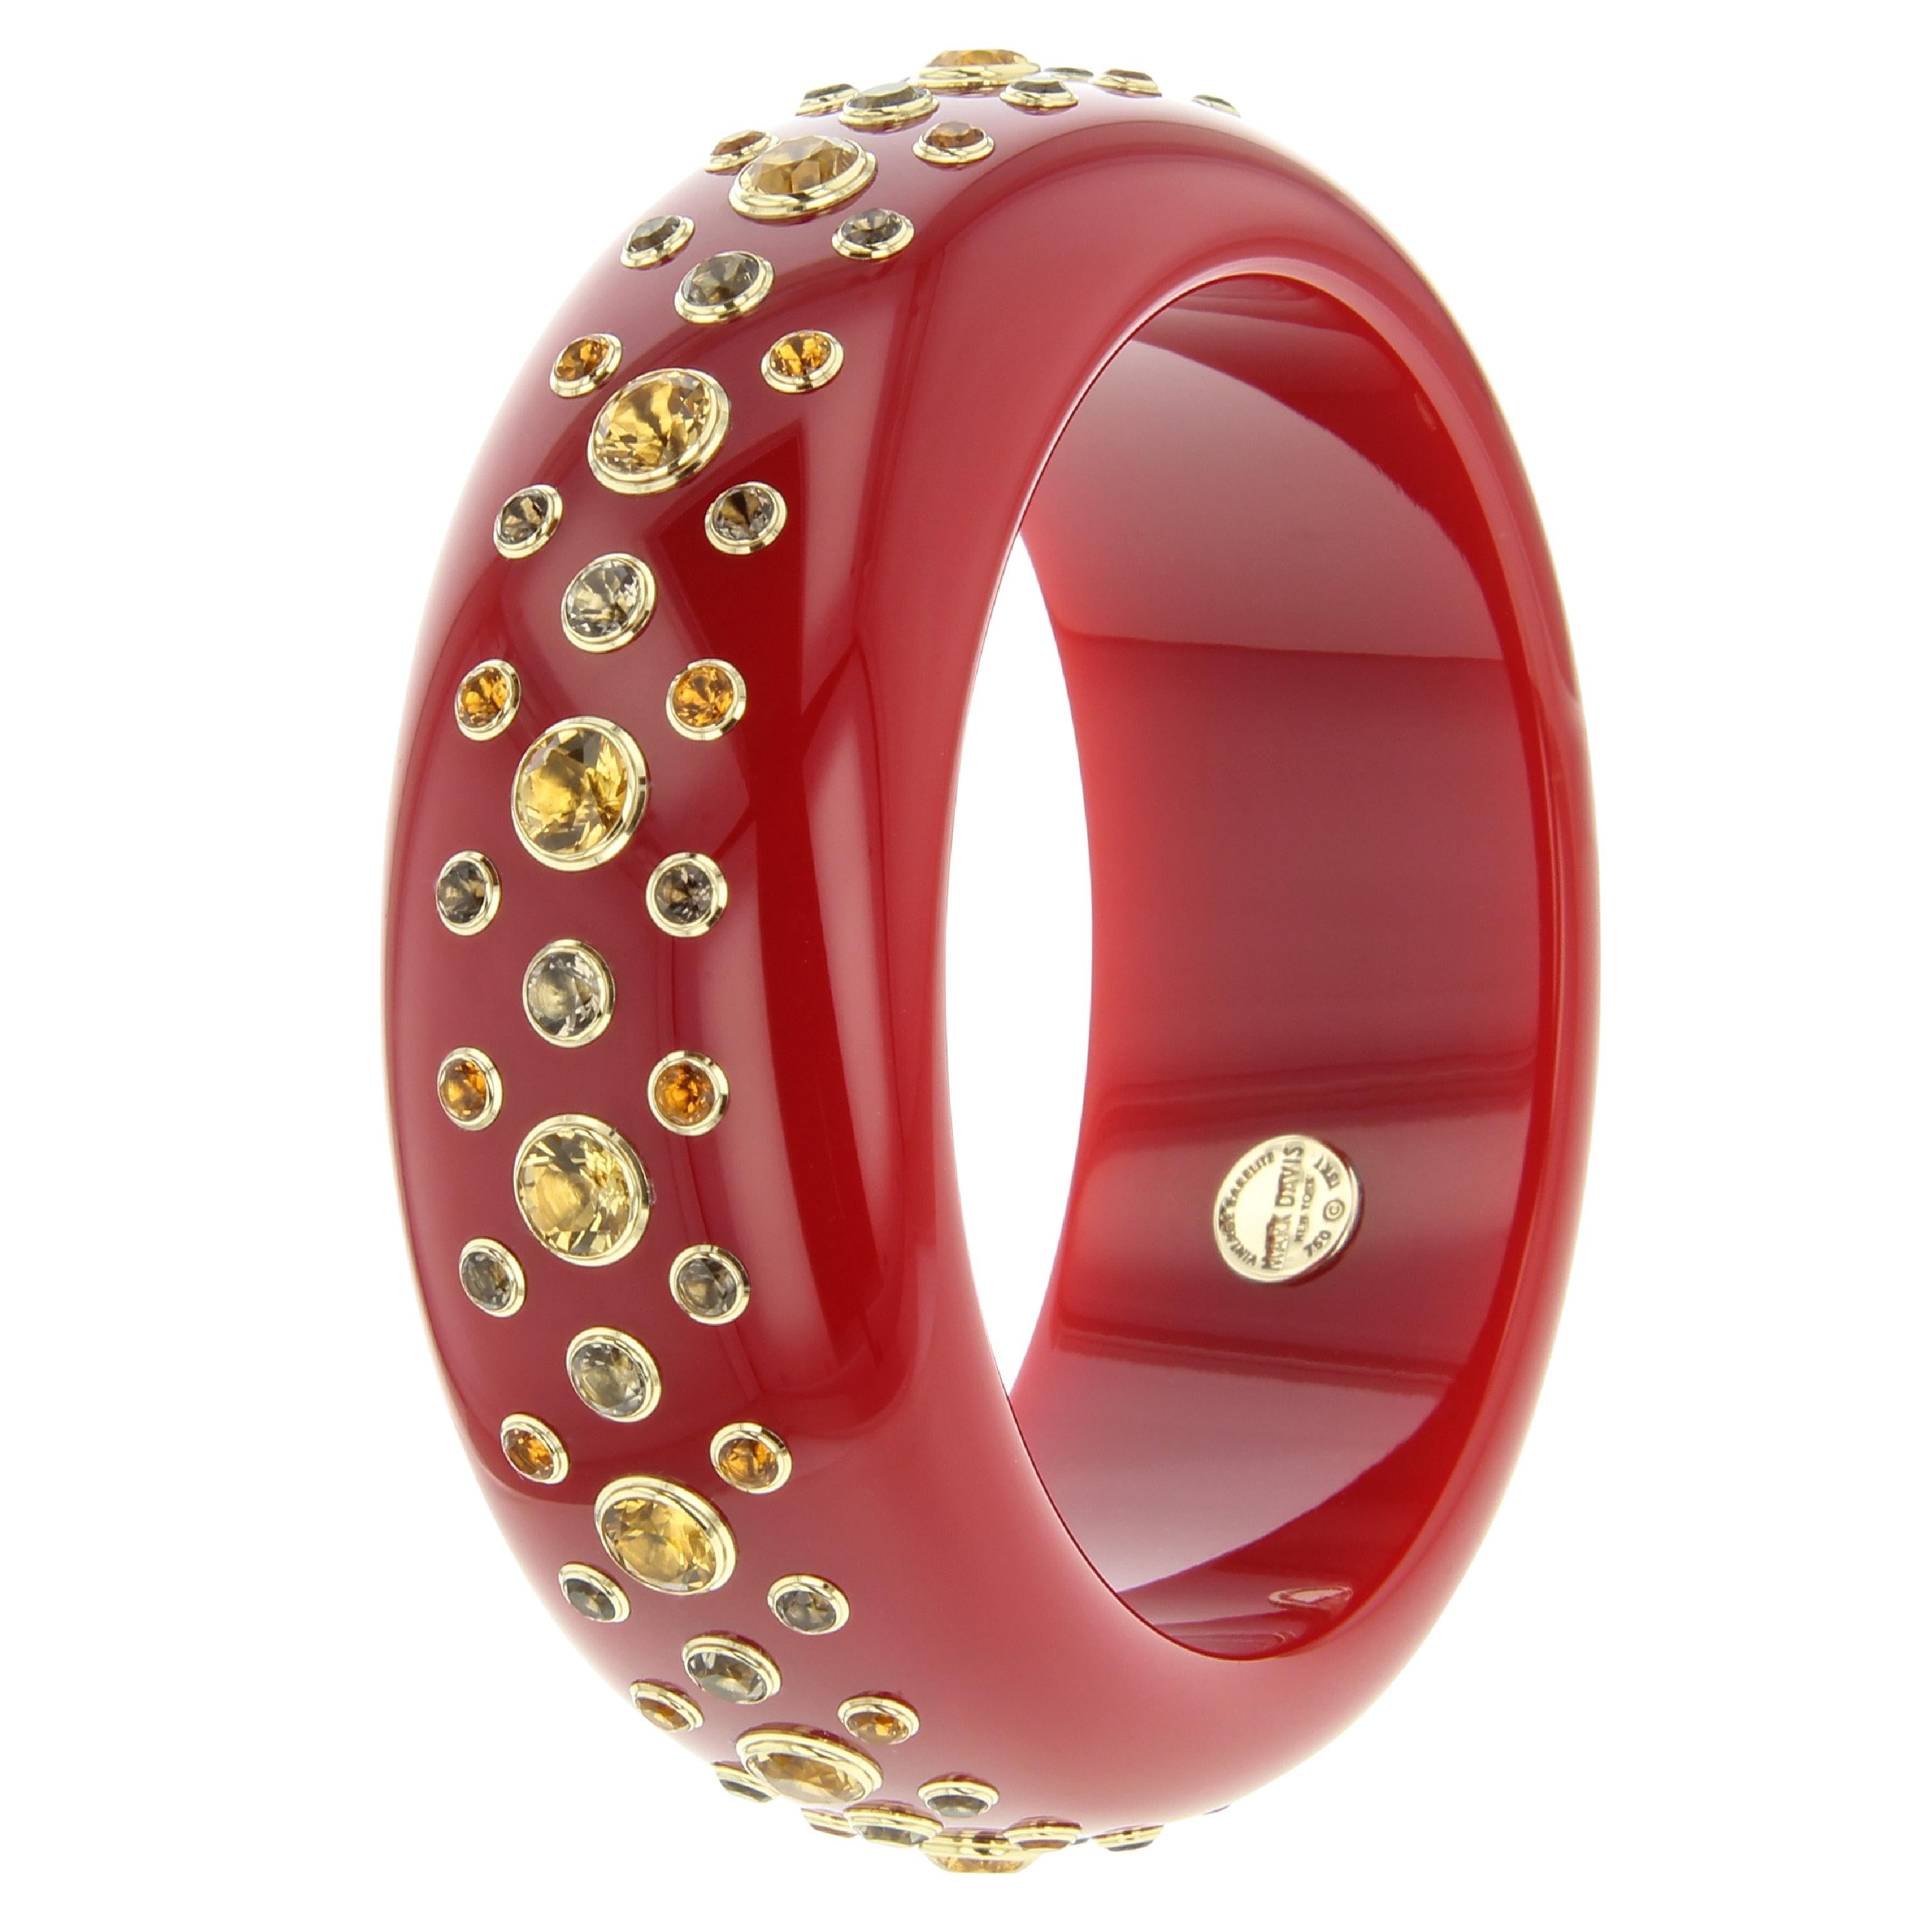 This bold, deep red, vintage bakelite bangle by Mark Davis makes a strong statement. The bakelite is not marbled which makes the red color even more intense. The bracelet features two distinct shades of citrine along with smoky quartz. The stones